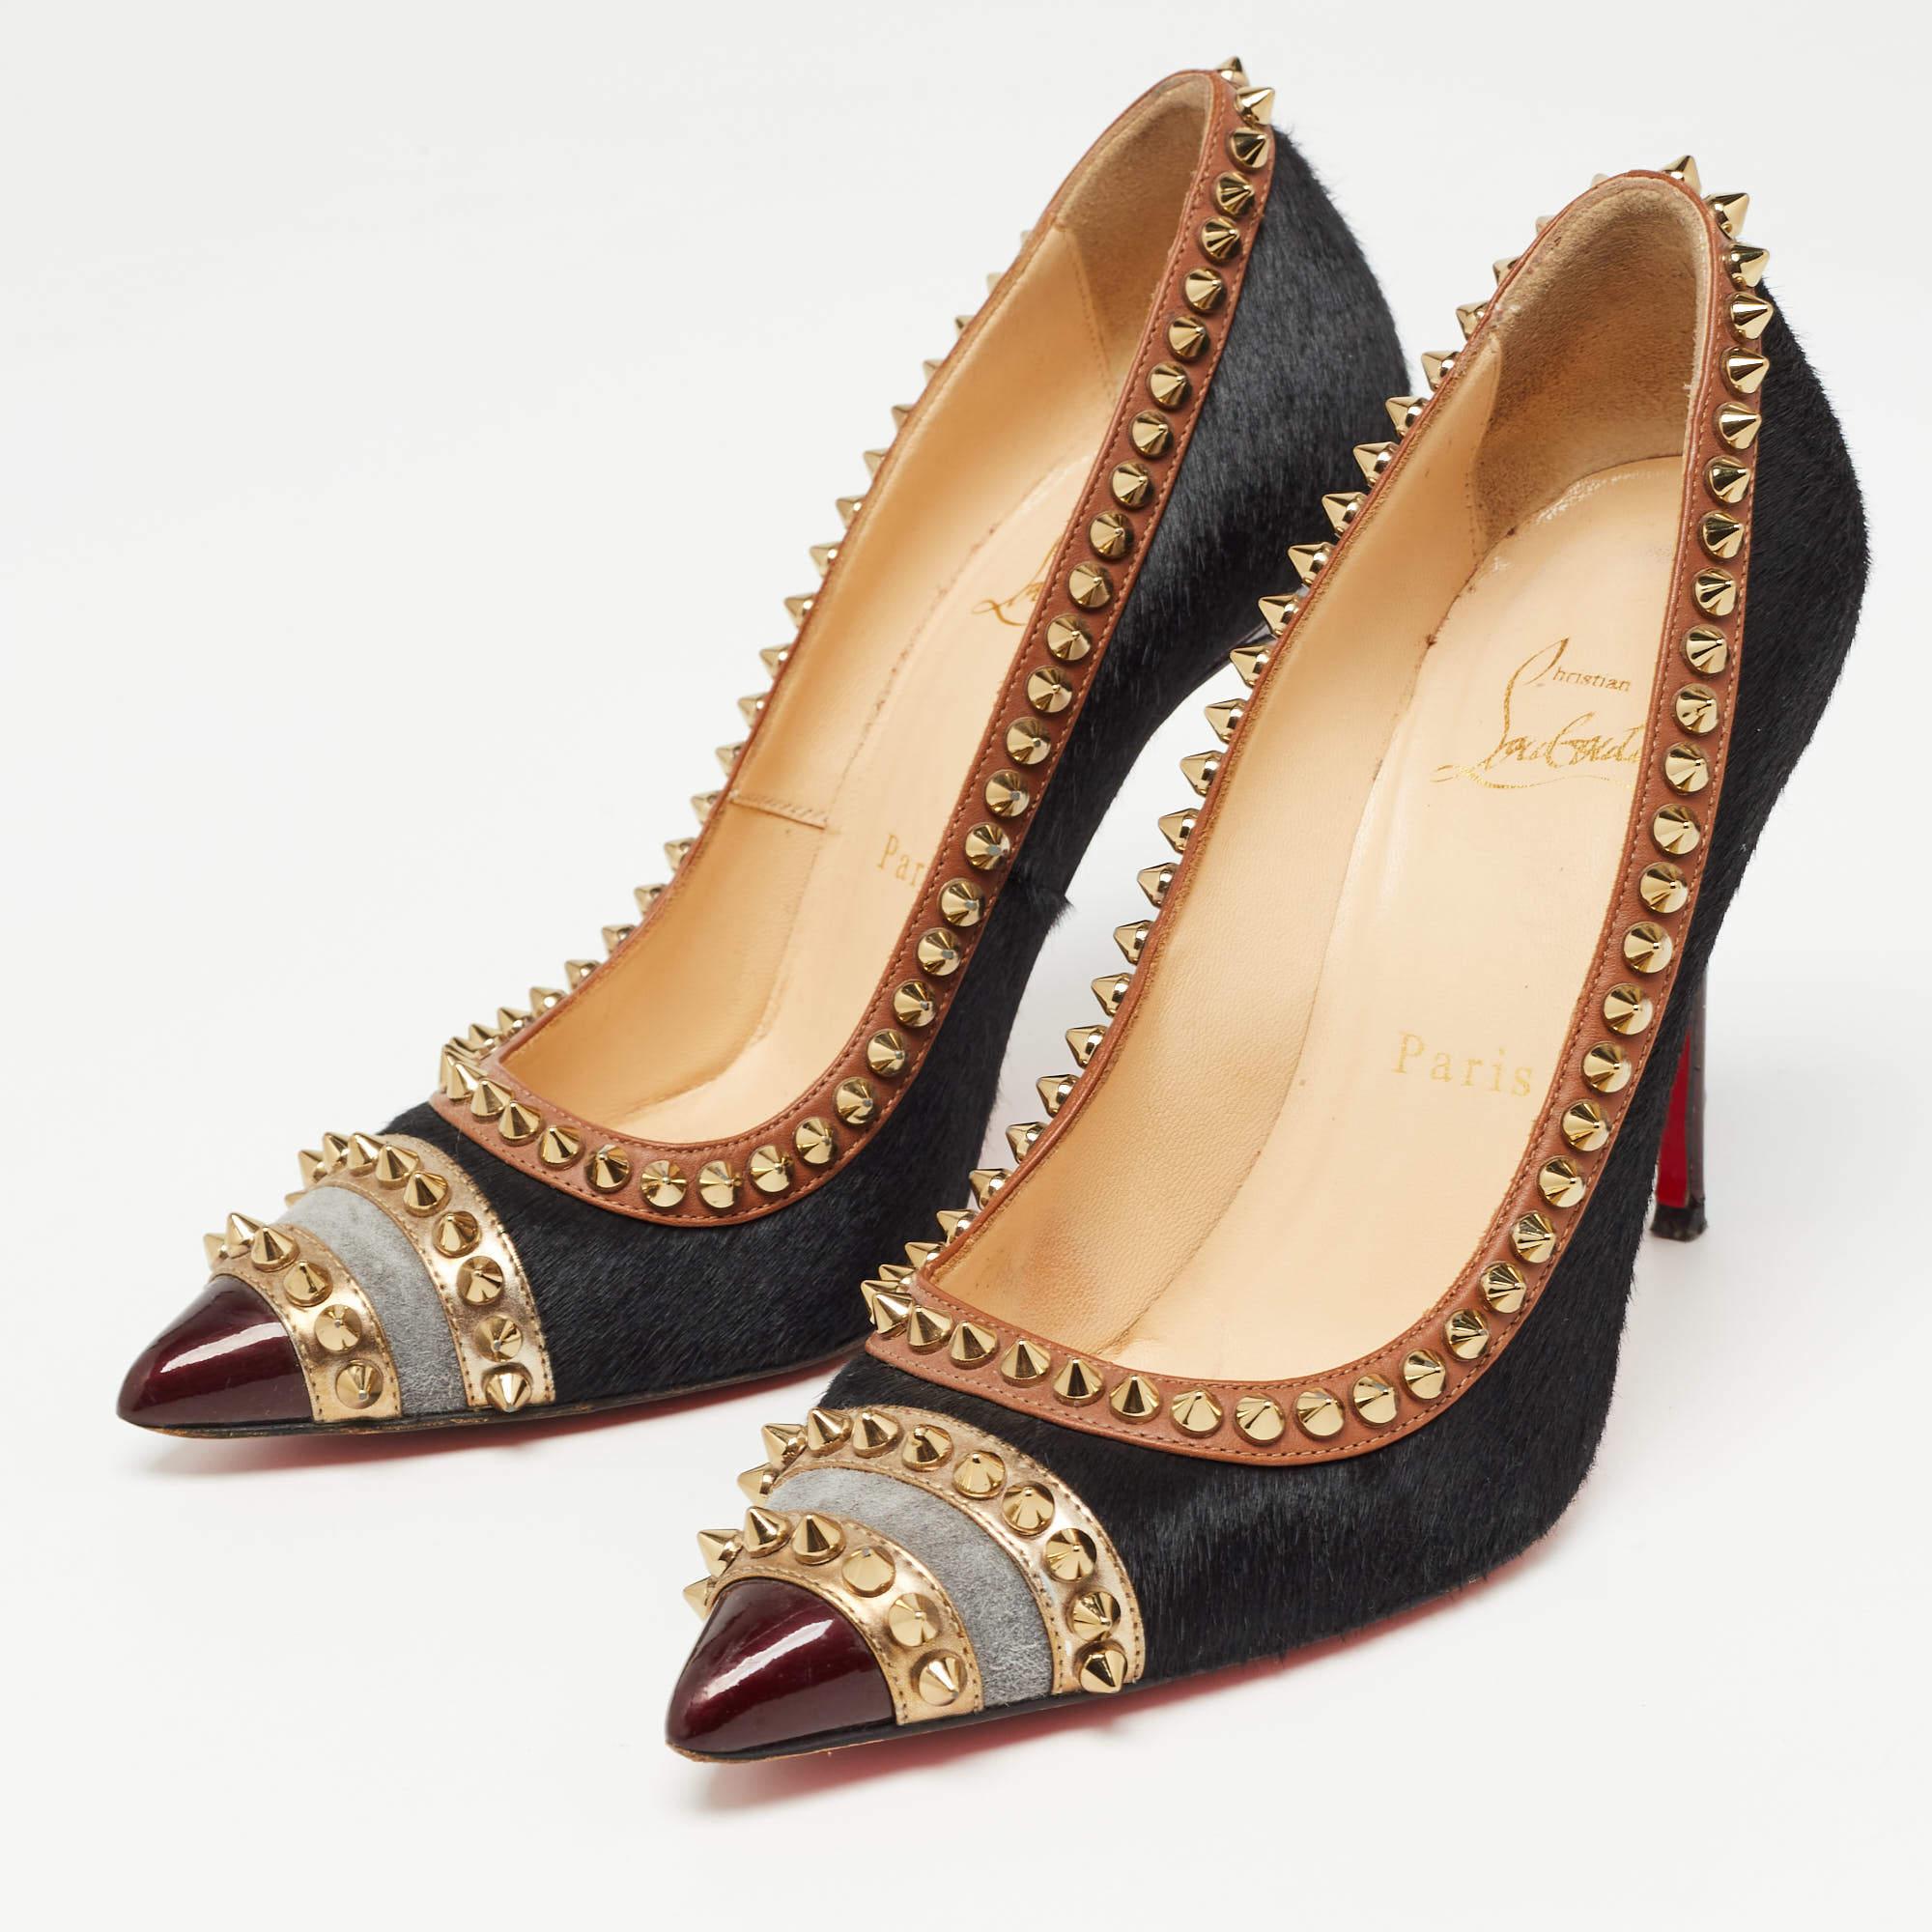 Christian Louboutin Black Calf Hair and Leather Malabar Hill Pumps Size 36 For Sale 4